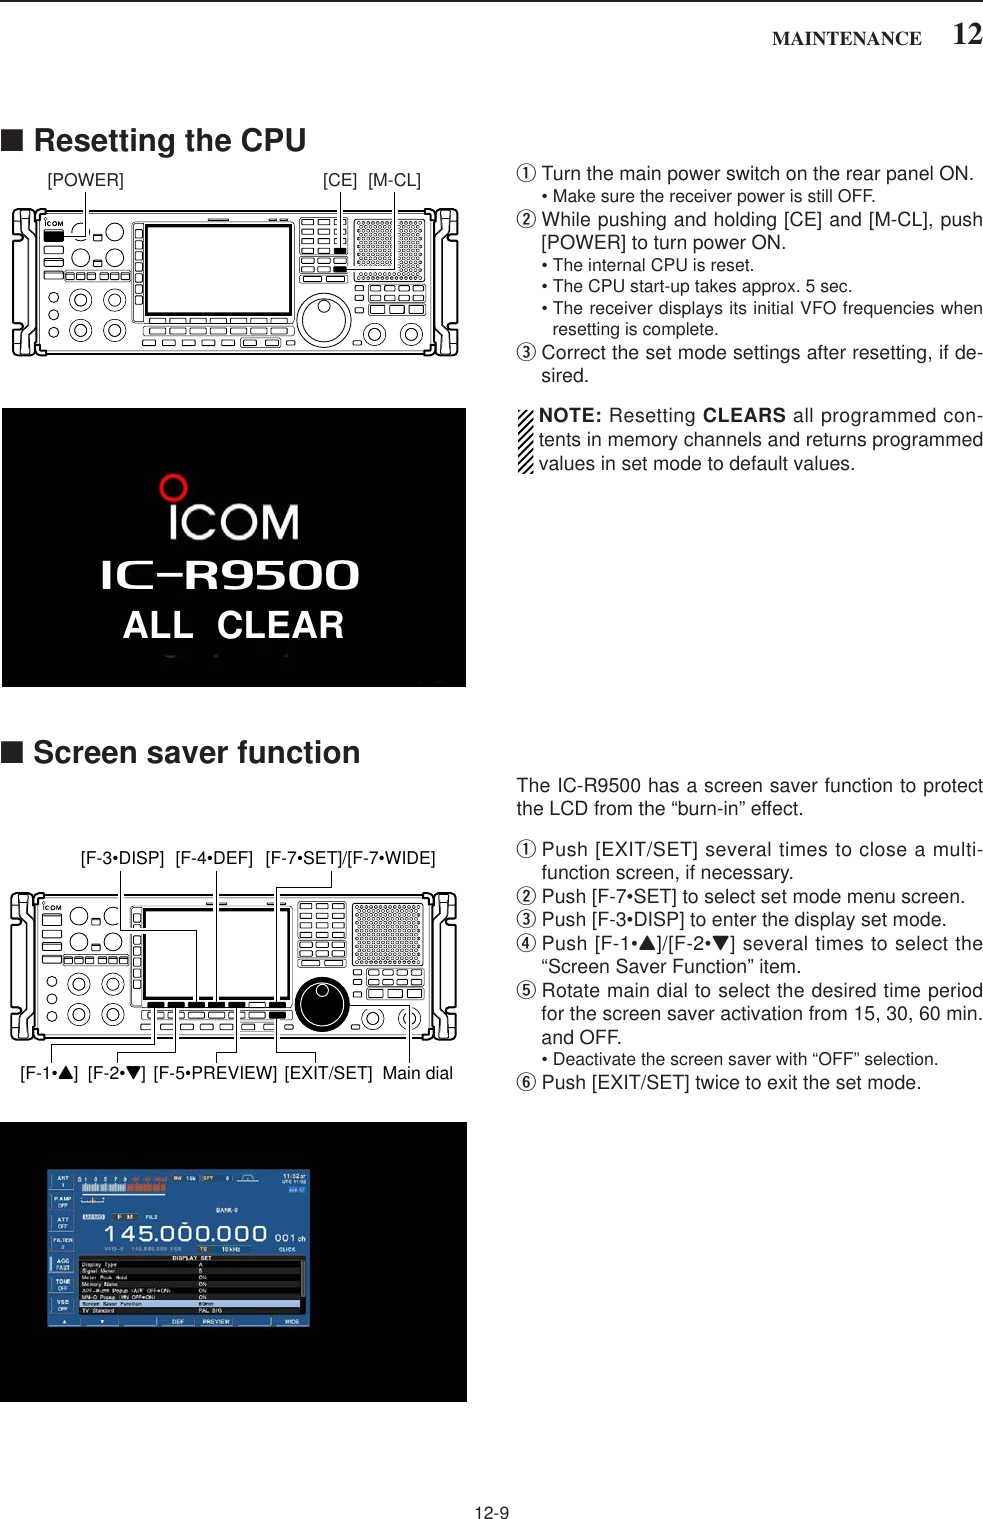 12-912MAINTENANCE■Resetting the CPUqTurn the main power switch on the rear panel ON.• Make sure the receiver power is still OFF.wWhile pushing and holding [CE] and [M-CL], push[POWER] to turn power ON.• The internal CPU is reset.• The CPU start-up takes approx. 5 sec.• The receiver displays its initial VFO frequencies whenresetting is complete.eCorrect the set mode settings after resetting, if de-sired.NOTE: Resetting CLEARS all programmed con-tents in memory channels and returns programmedvalues in set mode to default values.■Screen saver functionThe IC-R9500 has a screen saver function to protectthe LCD from the “burn-in” effect.qPush [EXIT/SET] several times to close a multi-function screen, if necessary.wPush [F-7•SET] to select set mode menu screen.ePush [F-3•DISP] to enter the display set mode.rPush [F-1•Y]/[F-2•Z] several times to select the“Screen Saver Function” item.tRotate main dial to select the desired time periodfor the screen saver activation from 15, 30, 60 min.and OFF.• Deactivate the screen saver with “OFF” selection.yPush [EXIT/SET] twice to exit the set mode.[F-1•Y] [F-2•Z]Main dial[EXIT/SET][F-4•DEF] [F-7•SET]/[F-7•WIDE][F-3•DISP][F-5•PREVIEW][CE] [M-CL][POWER]ALL CLEARiR9500